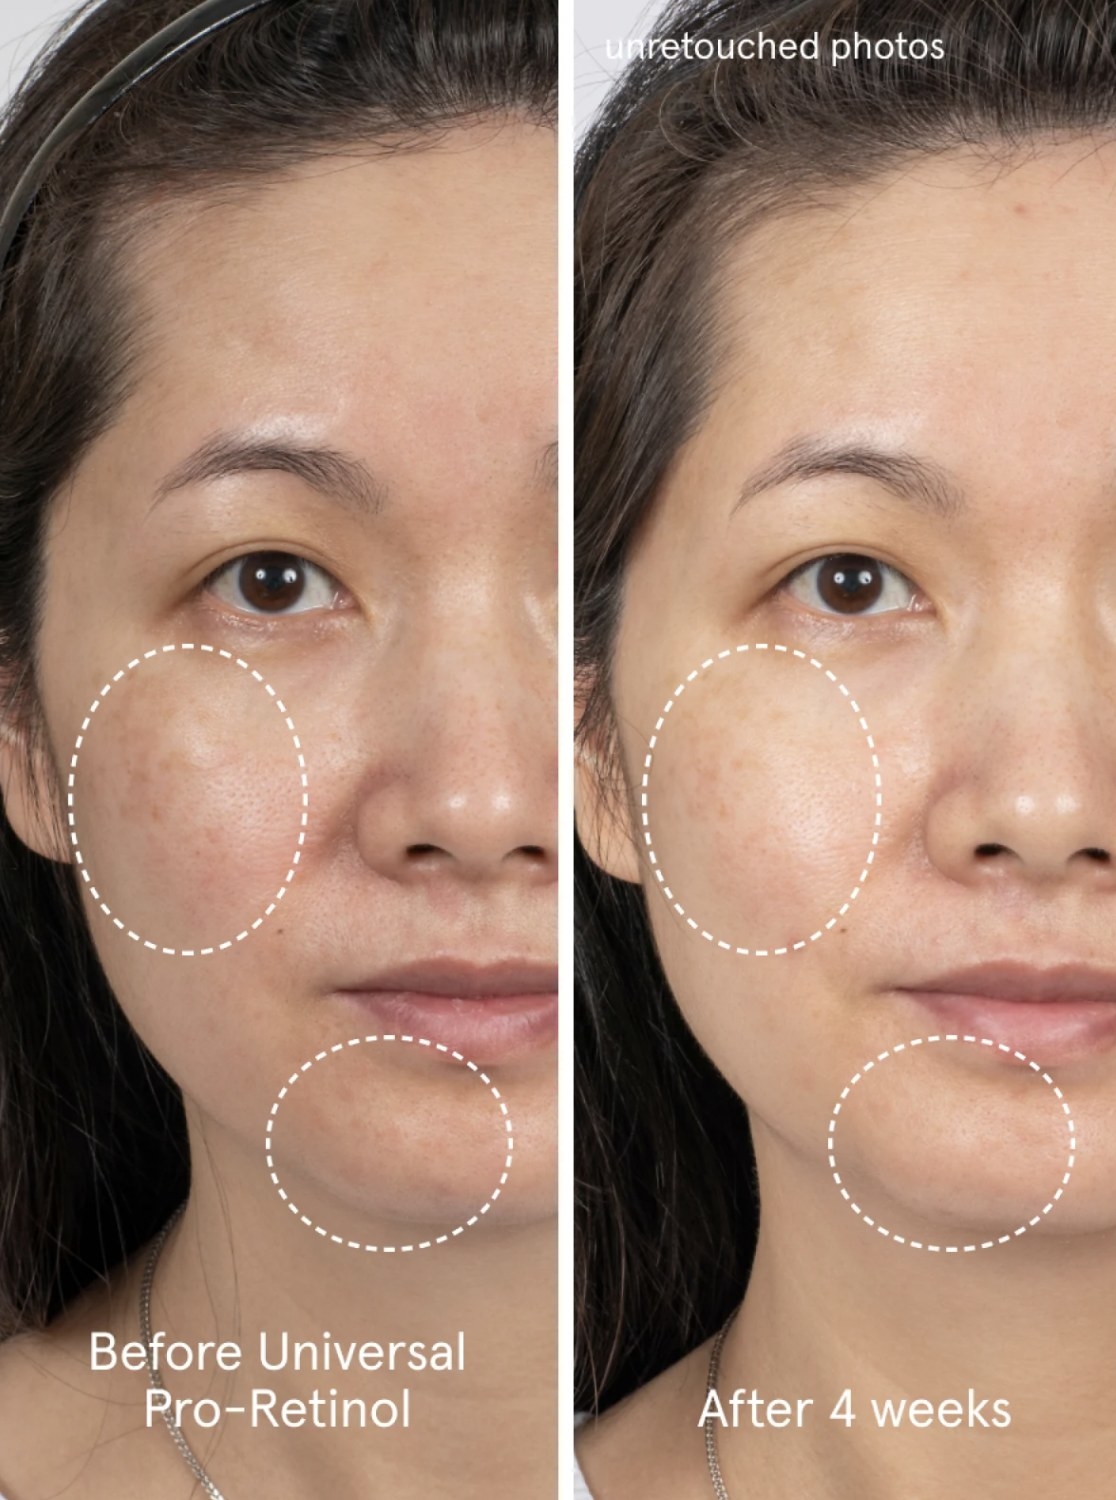 a before and after of a person with dark spots, and then visibly less dark spots after four weeks